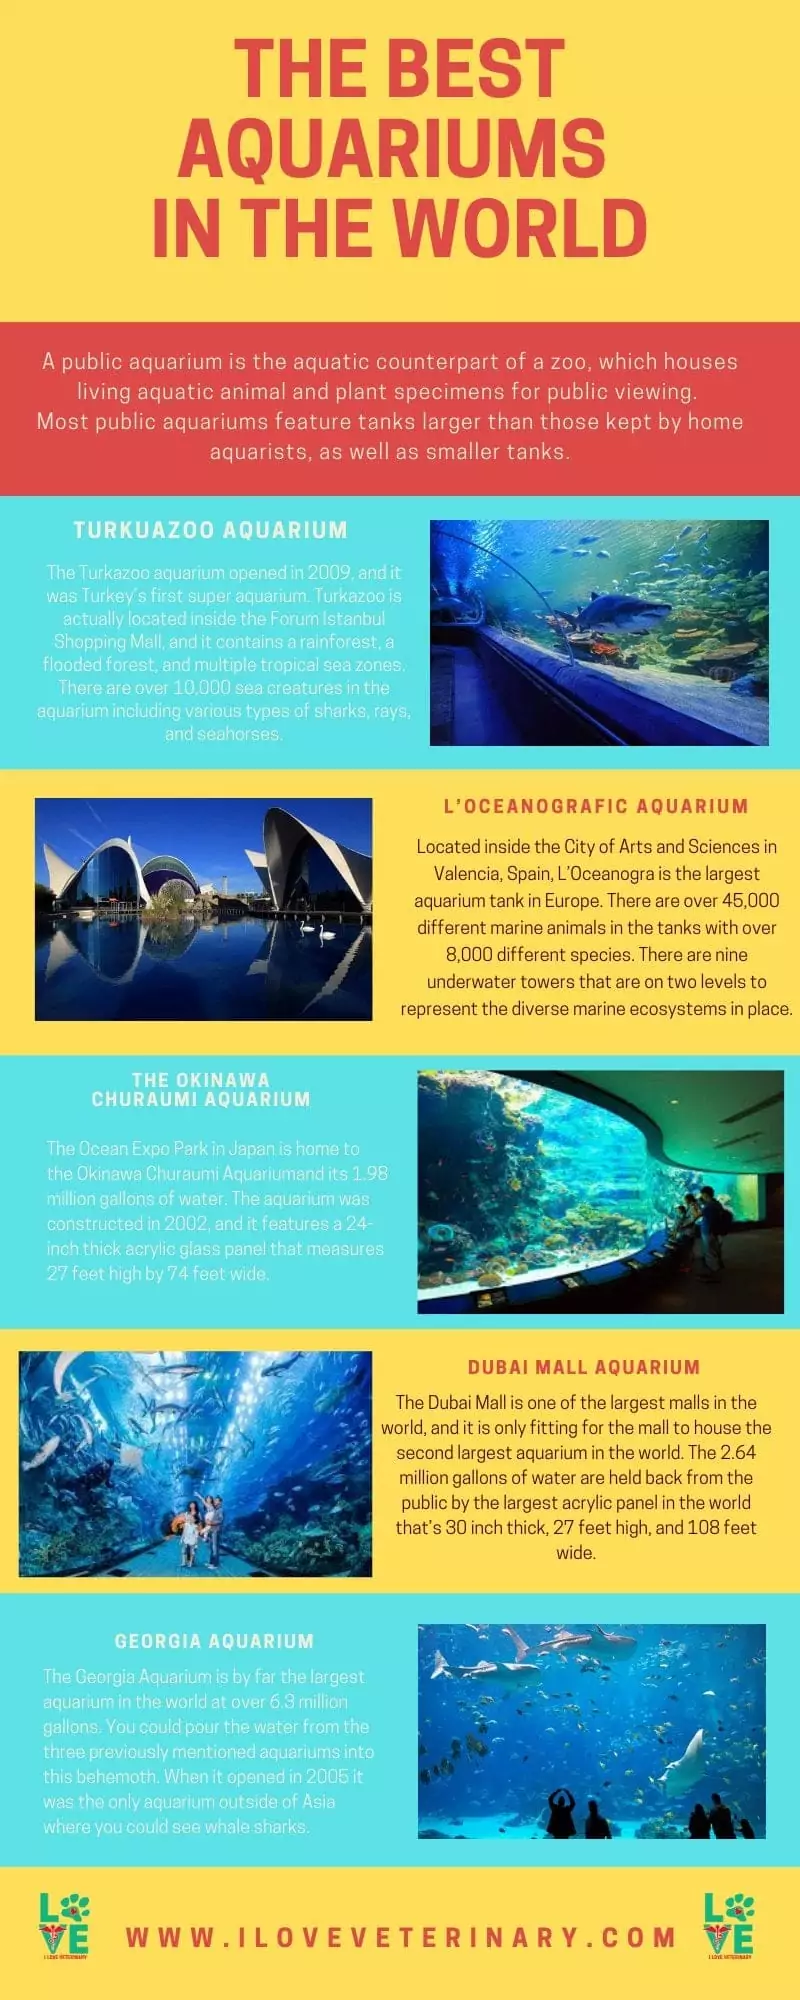 THE BEST AQUARIUMS IN THE WORLD